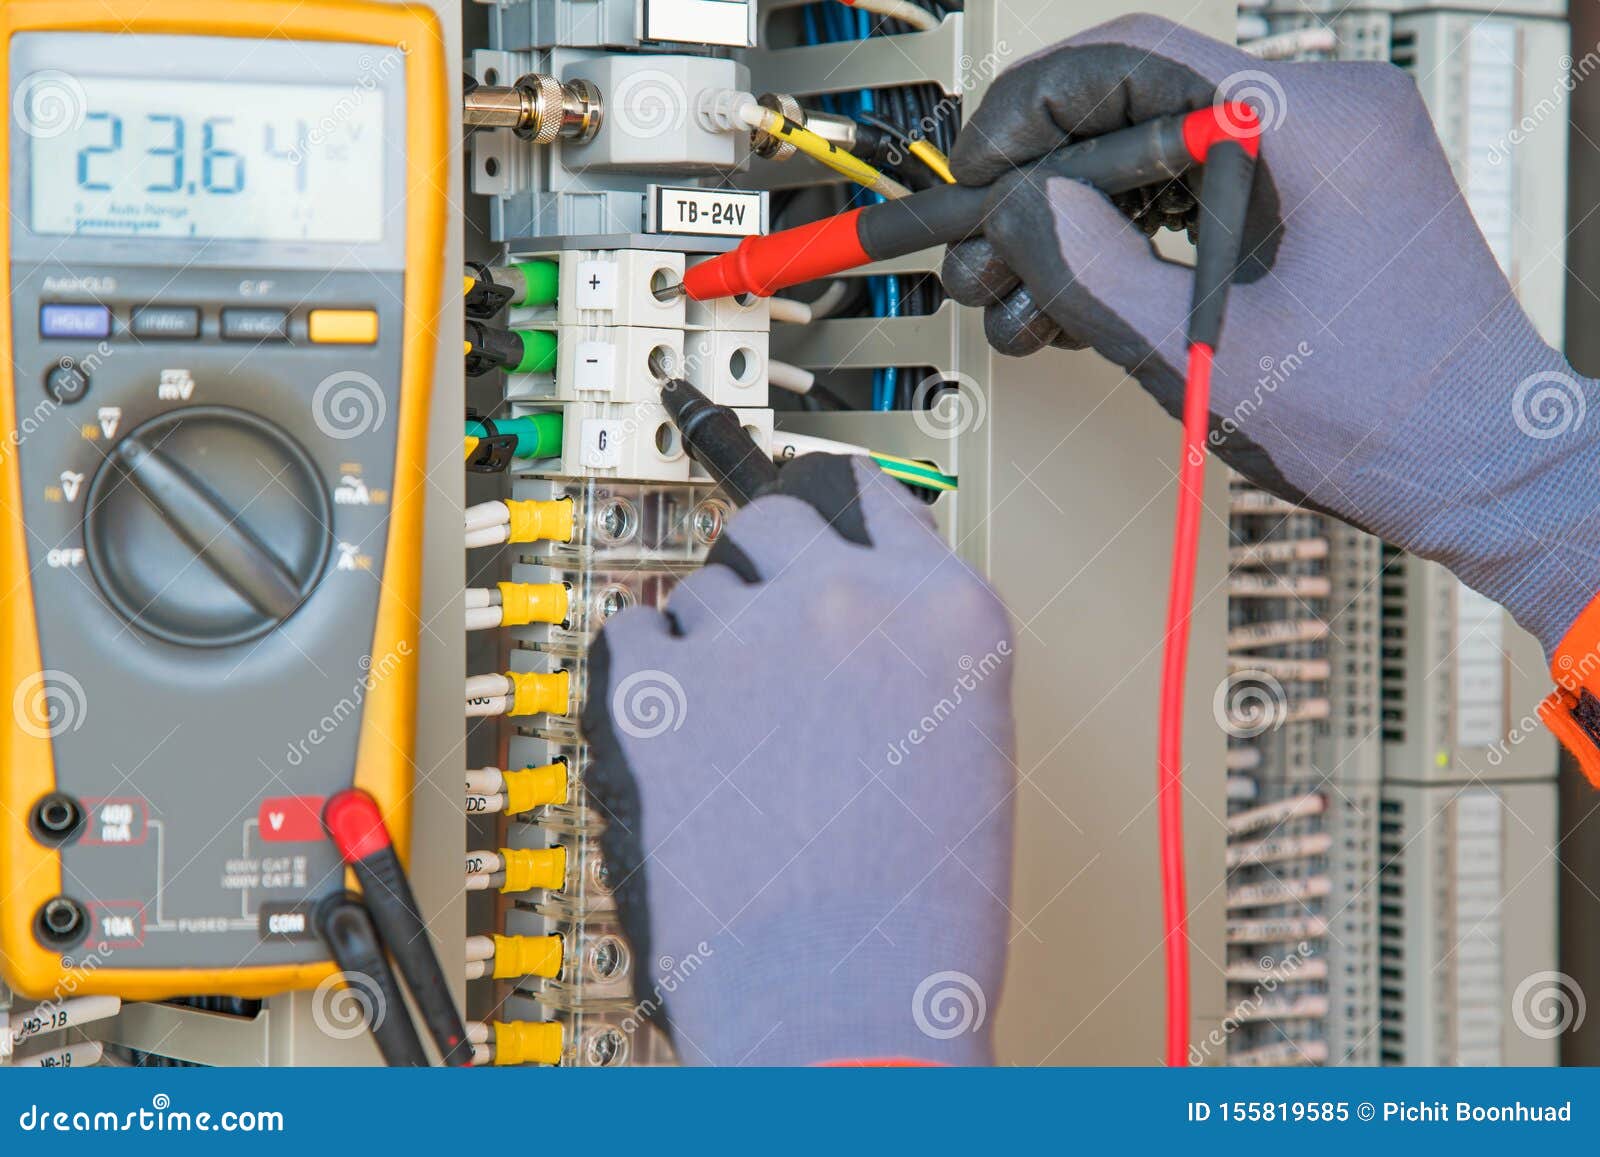 electrician and instrument worker wearing safety gloves measuring voltage and checking electric circuit by using digital meter